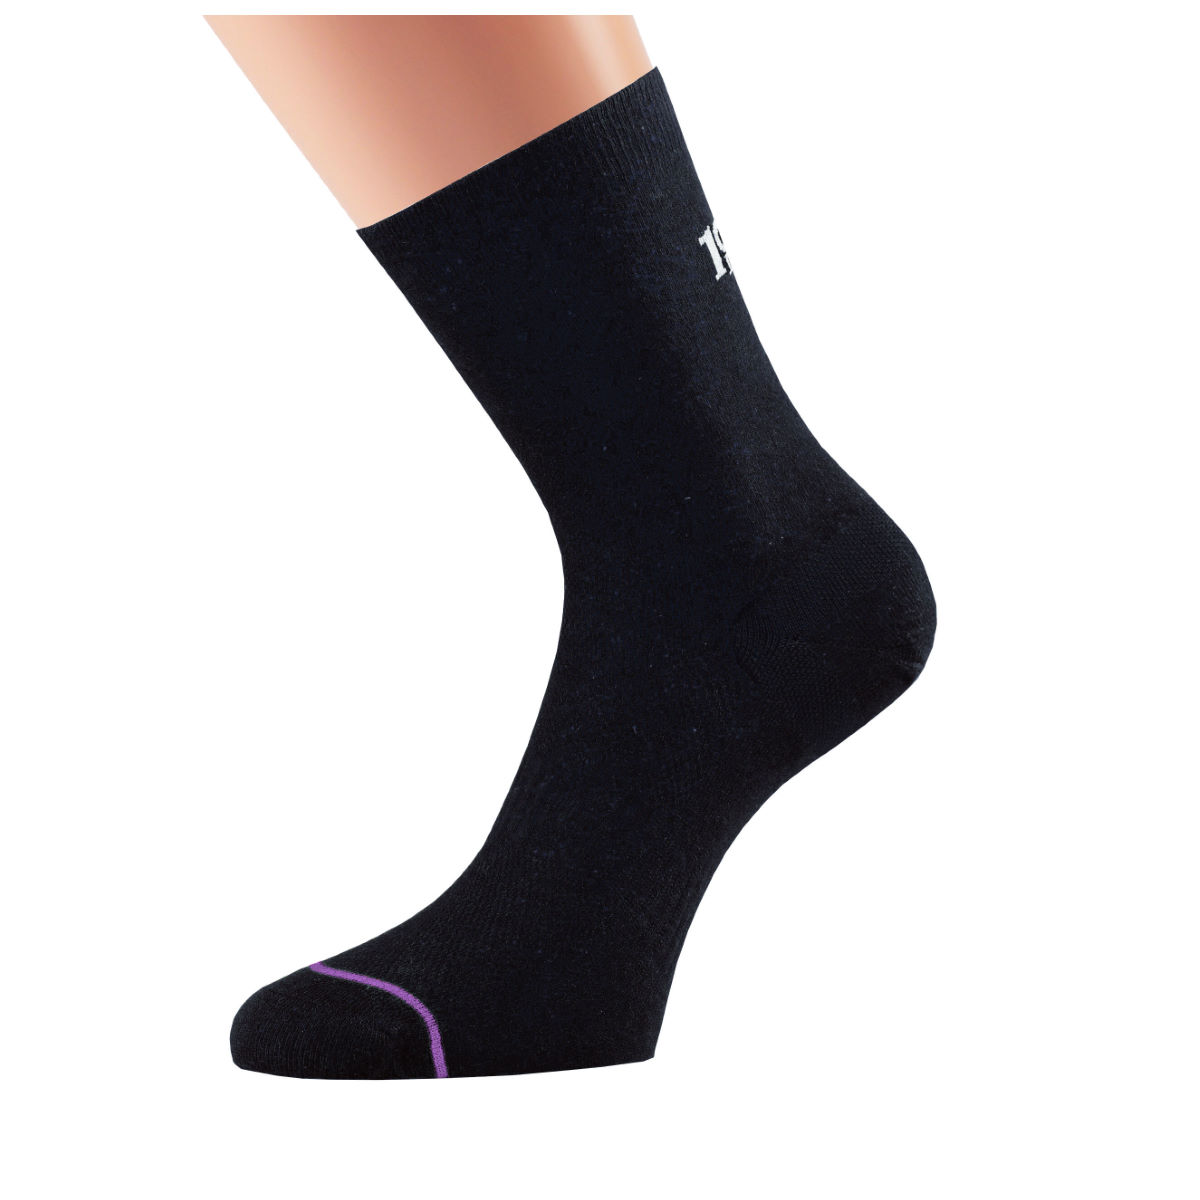 Calcetines 1000 Mile Ultimate para mujer  - Calcetines